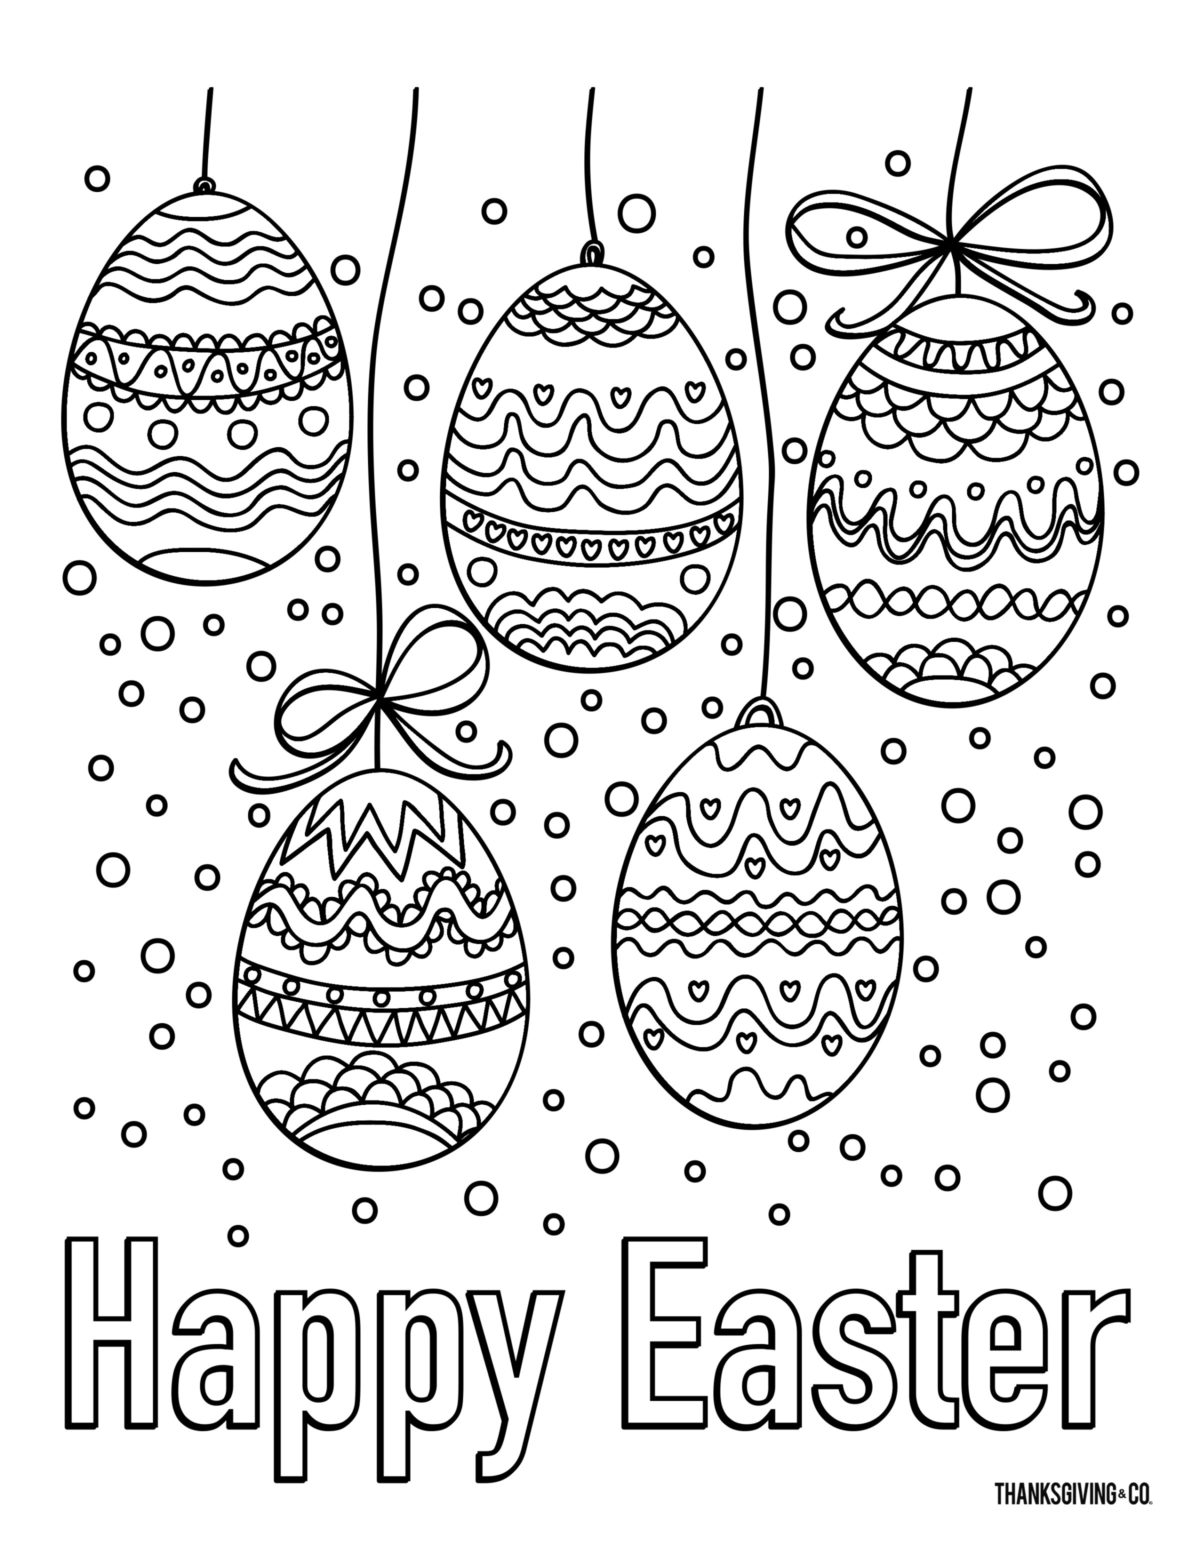 20 free printable Easter coloring pages for adults that will ...